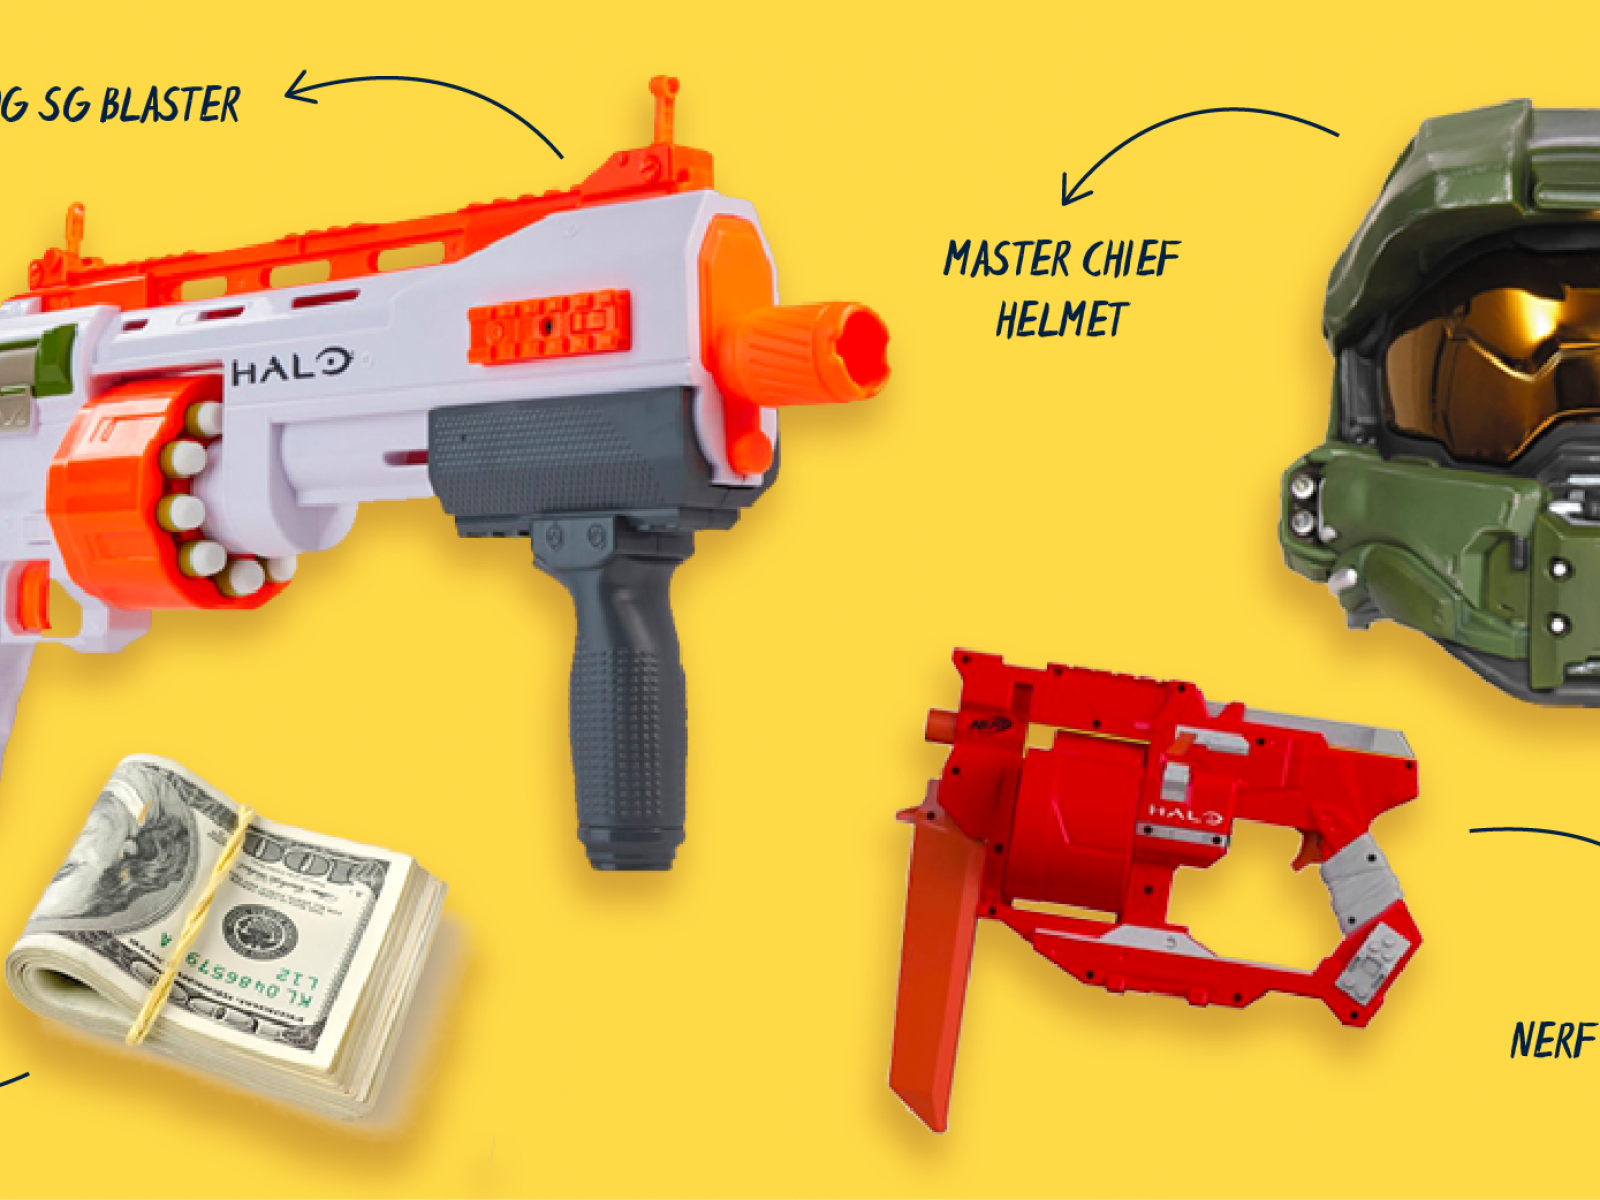 You Can Now Get Paid $1,170 to Test Nerf Blasters—and You Get to